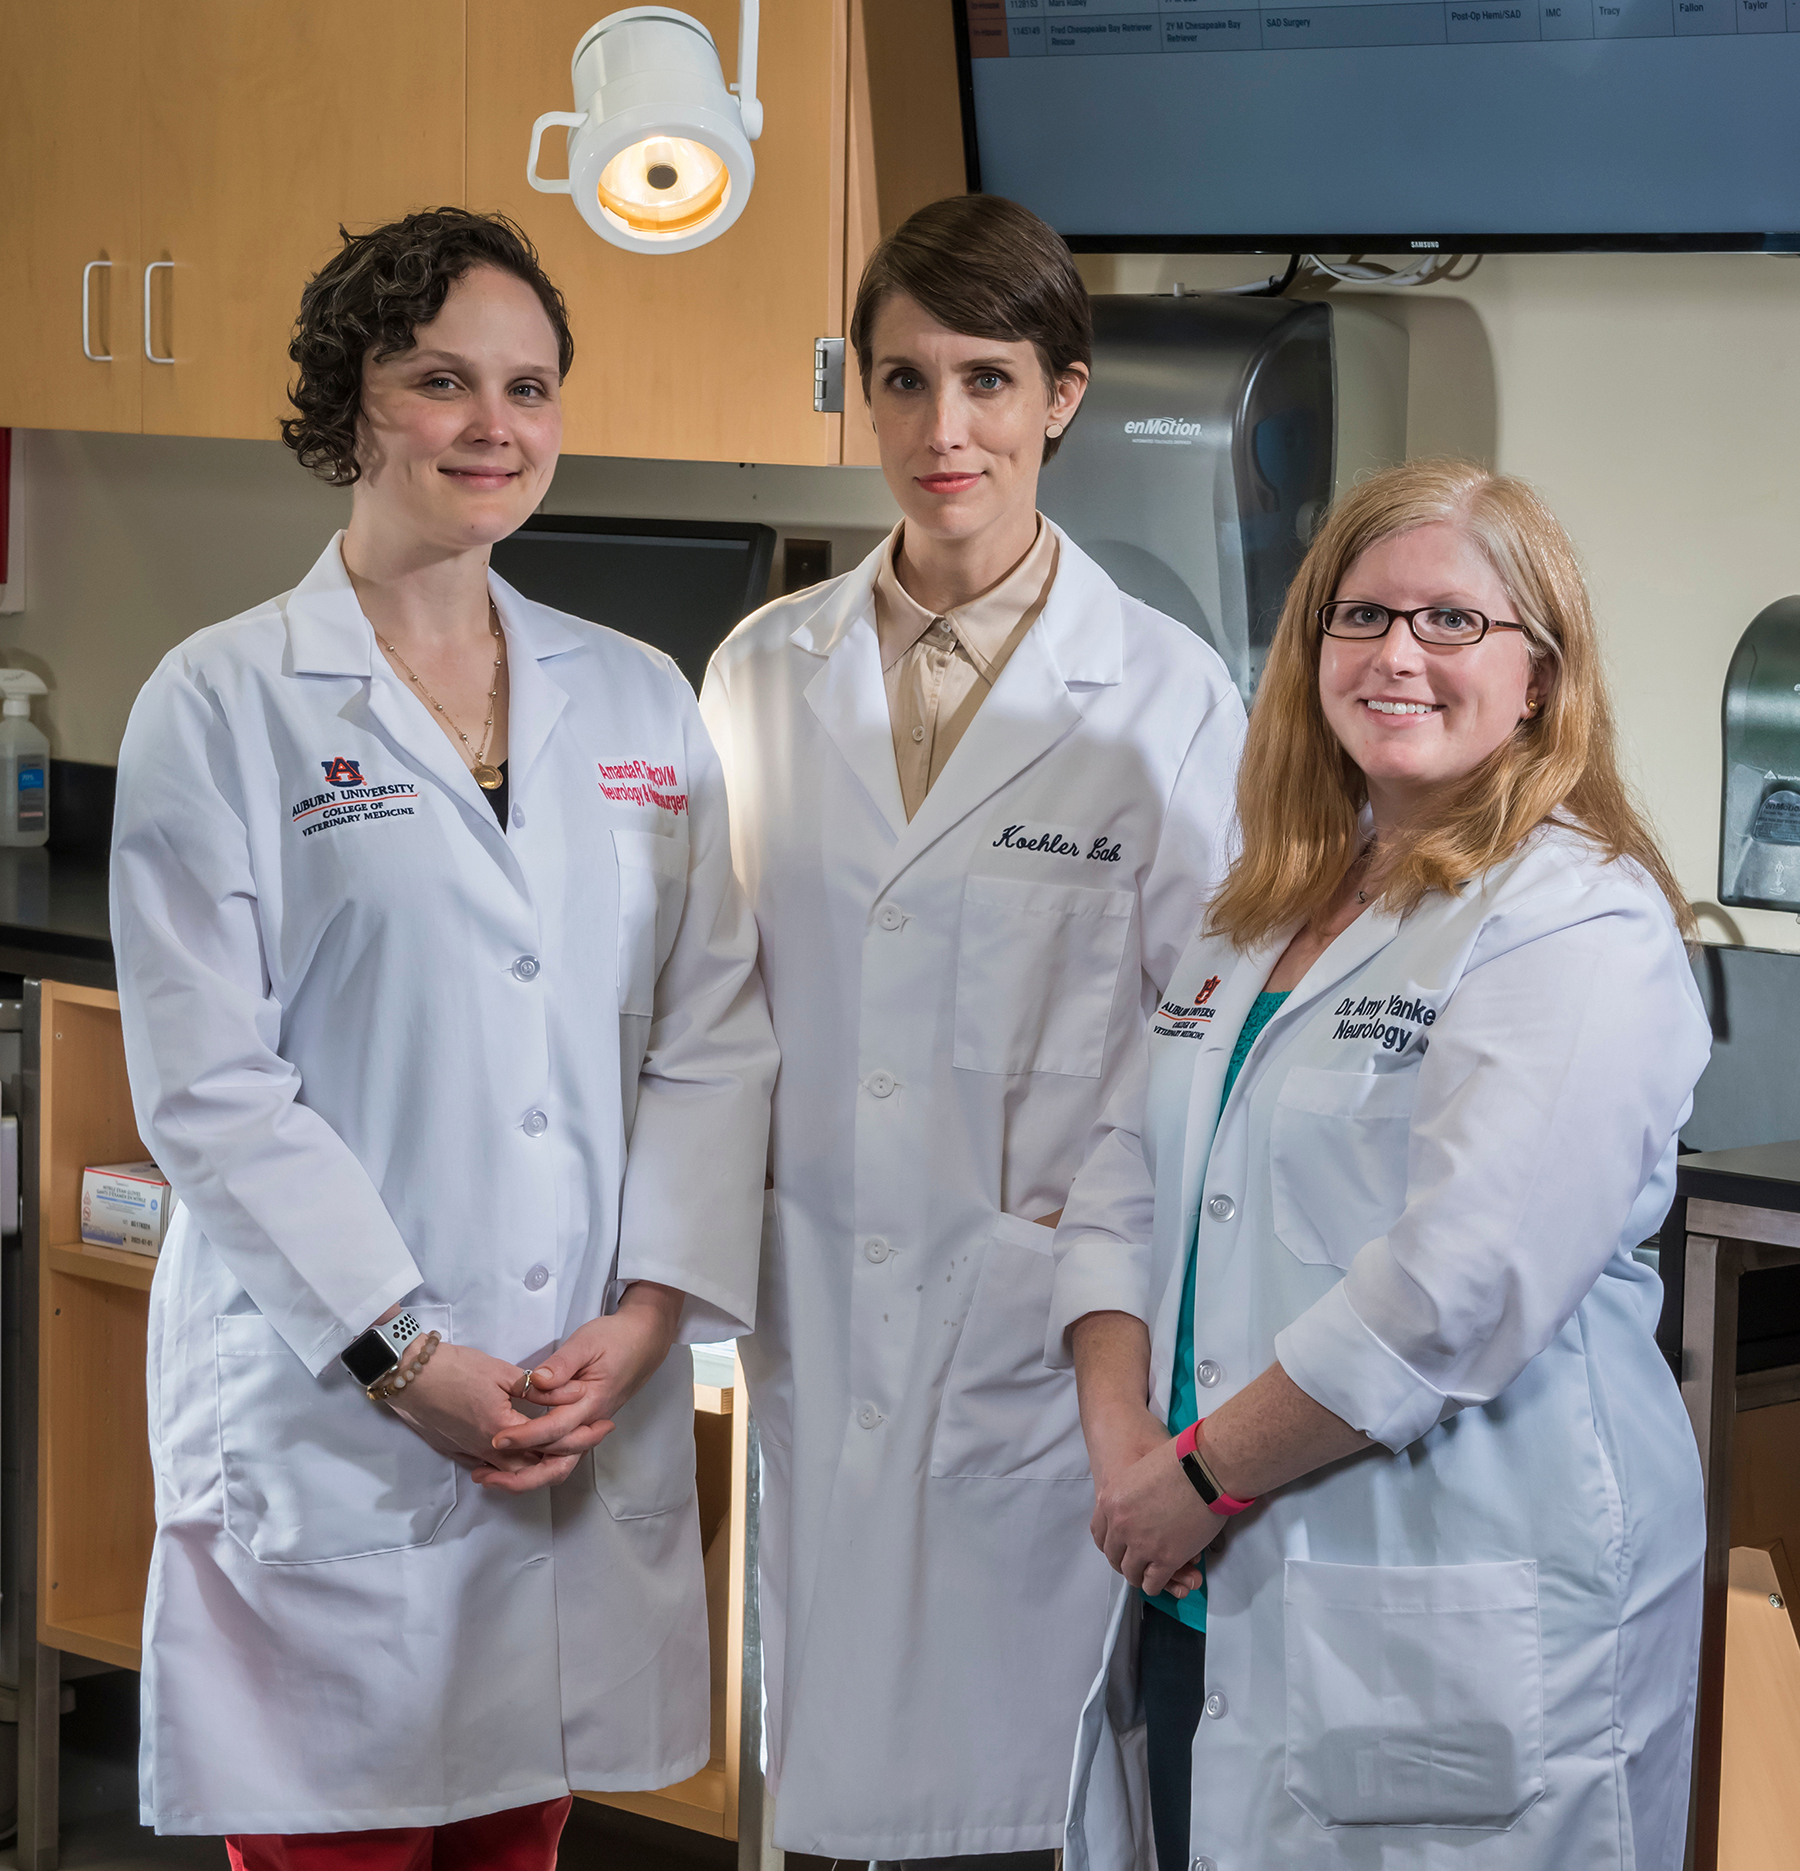 Former veterinary faculty Amanda Taylor, left, and current faculty Jey Koehler, center, and Amy Yanke.